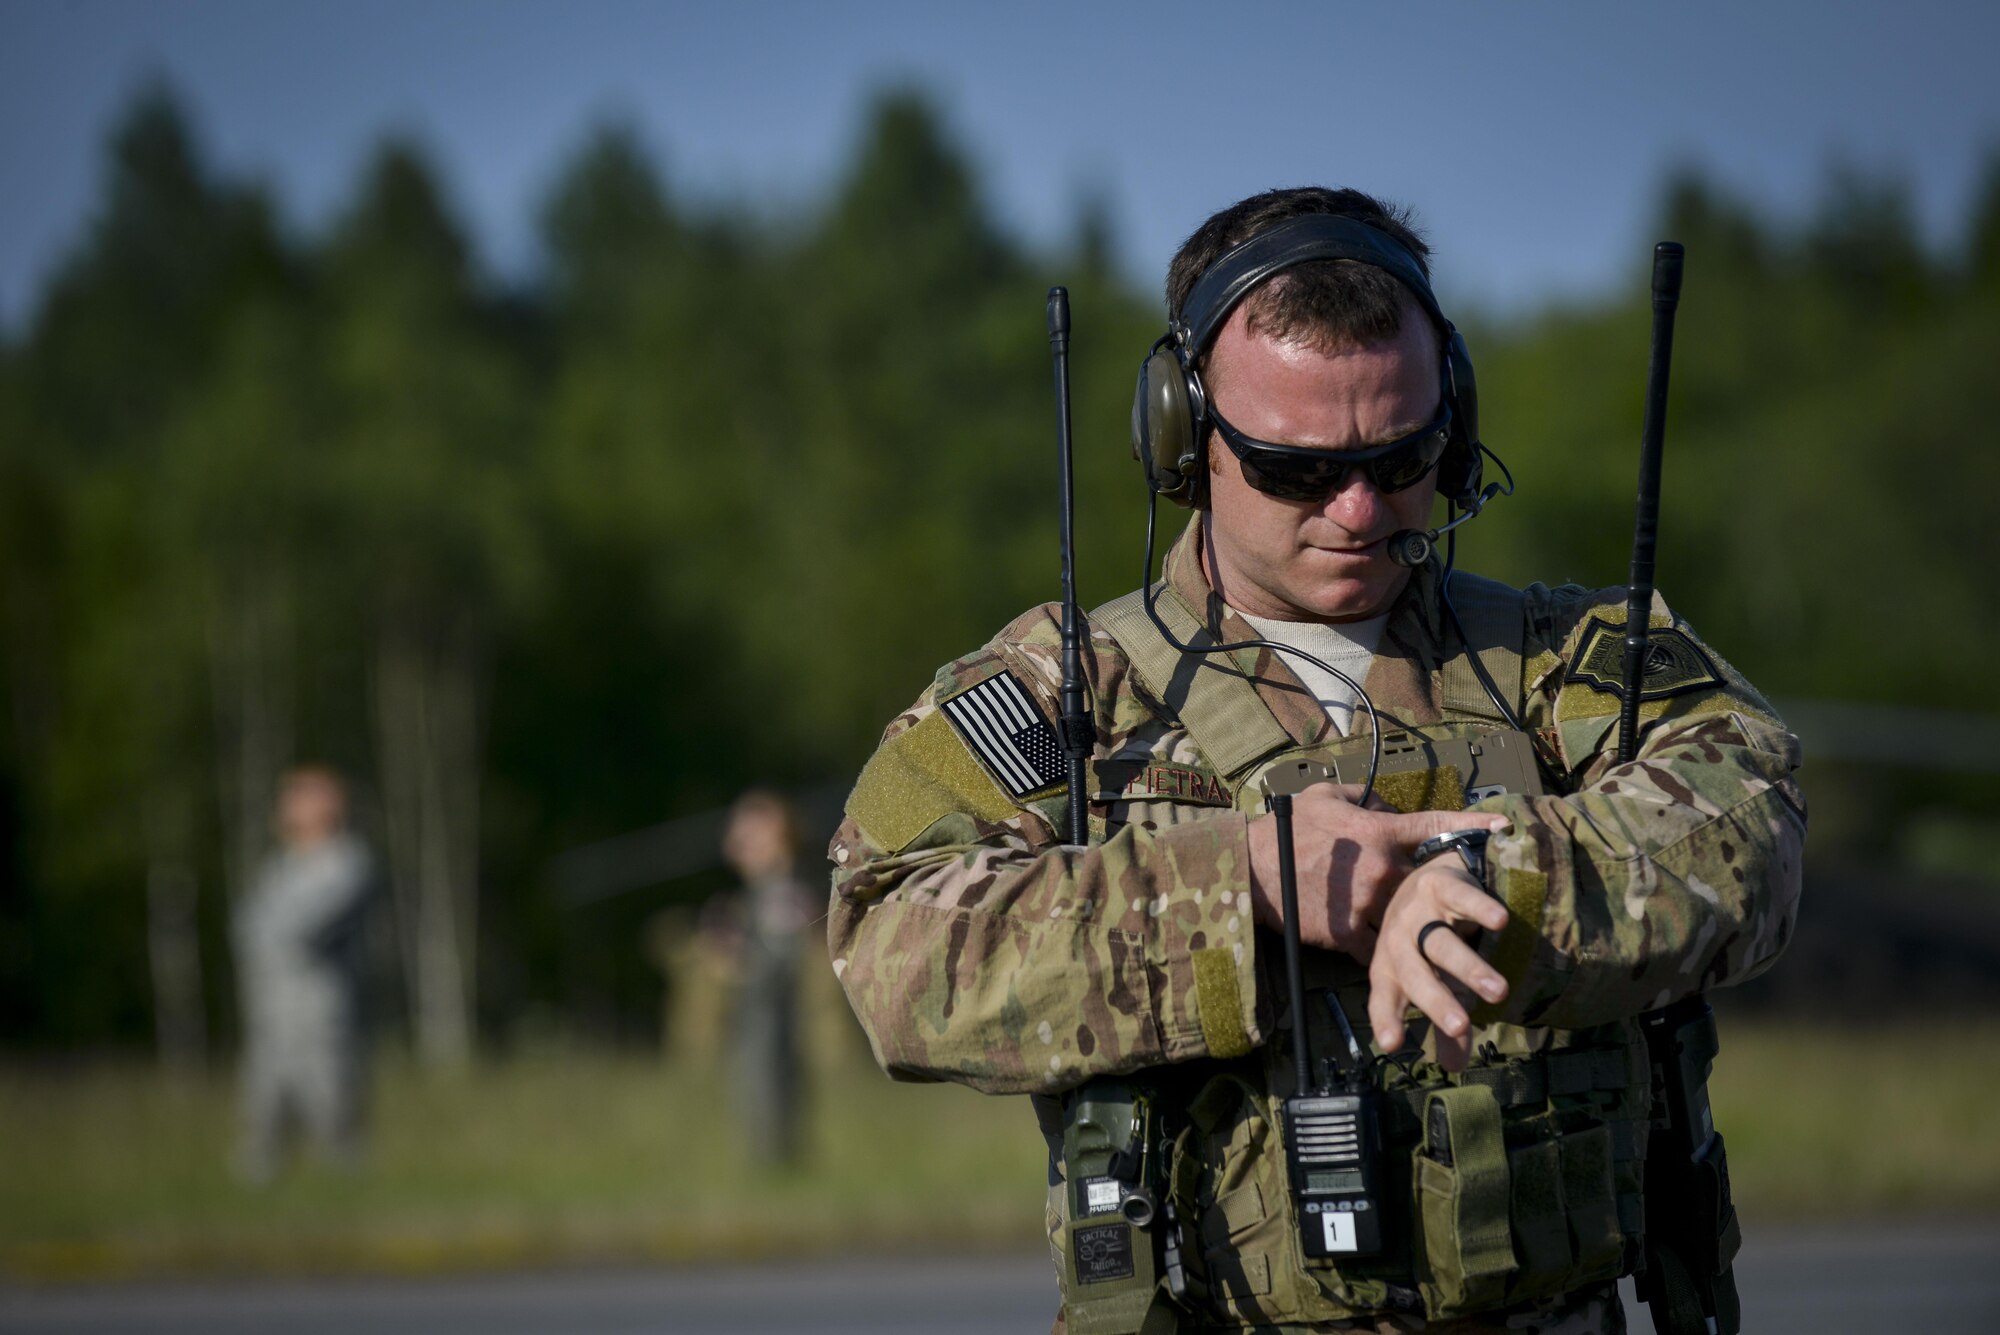 U.S. Air Force Master Sgt. Jared Pietras, 23rd Special Tactics Squadron weapons and tactics chief, calls an aircraft to land on a highway June 20, 2016, in Tallinn, Estonia. U.S. forces are in Europe participating in Saber Strike 16; a long-standing, U.S. Joint Chiefs of Staff-directed, U.S. Army Europe-led cooperative-training exercise, which has been conducted annually since 2010.  This year’s exercise will focus on promoting interoperability with allies and regional partners.The United States has enduring interests in supporting peace and prosperity in Europe and bolstering the strength and vitality of NATO, which is critical to global security. (U.S. Air Force photo/Senior Airman Nicole Keim)